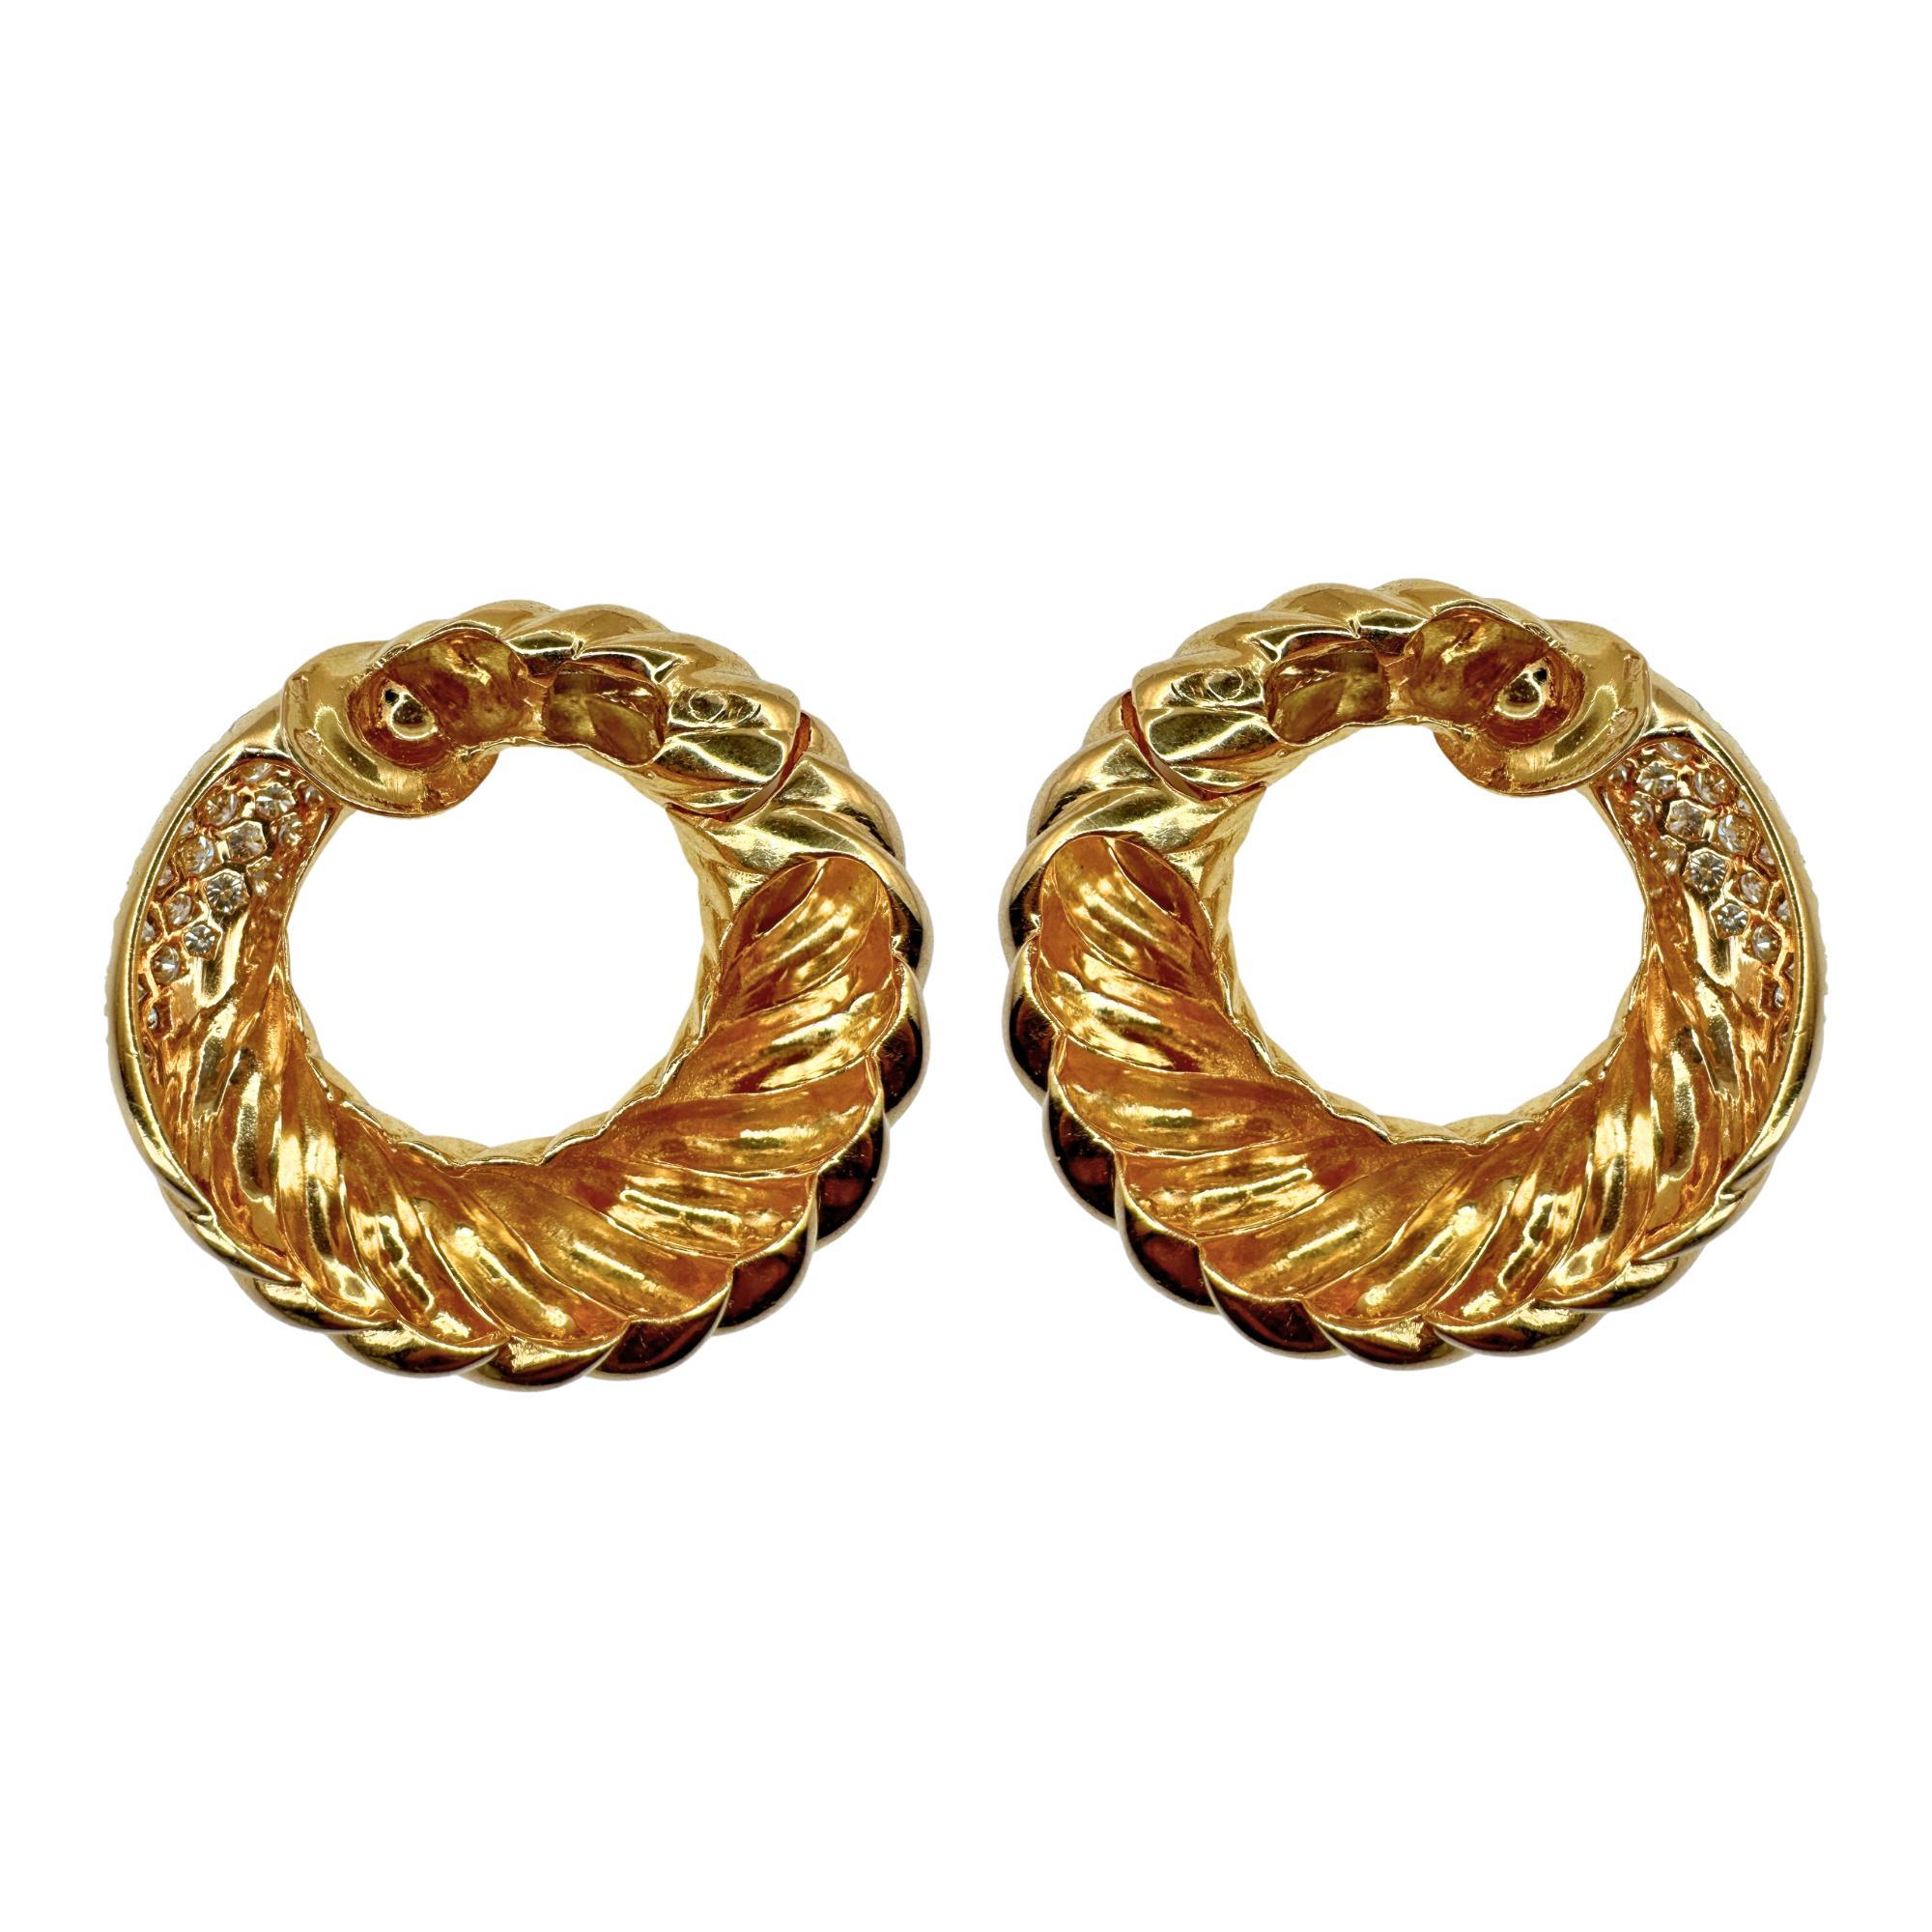 18k 1980's Van Cleef & Arpels Diamond Hoop Ear Clips In Good Condition For Sale In New York, NY